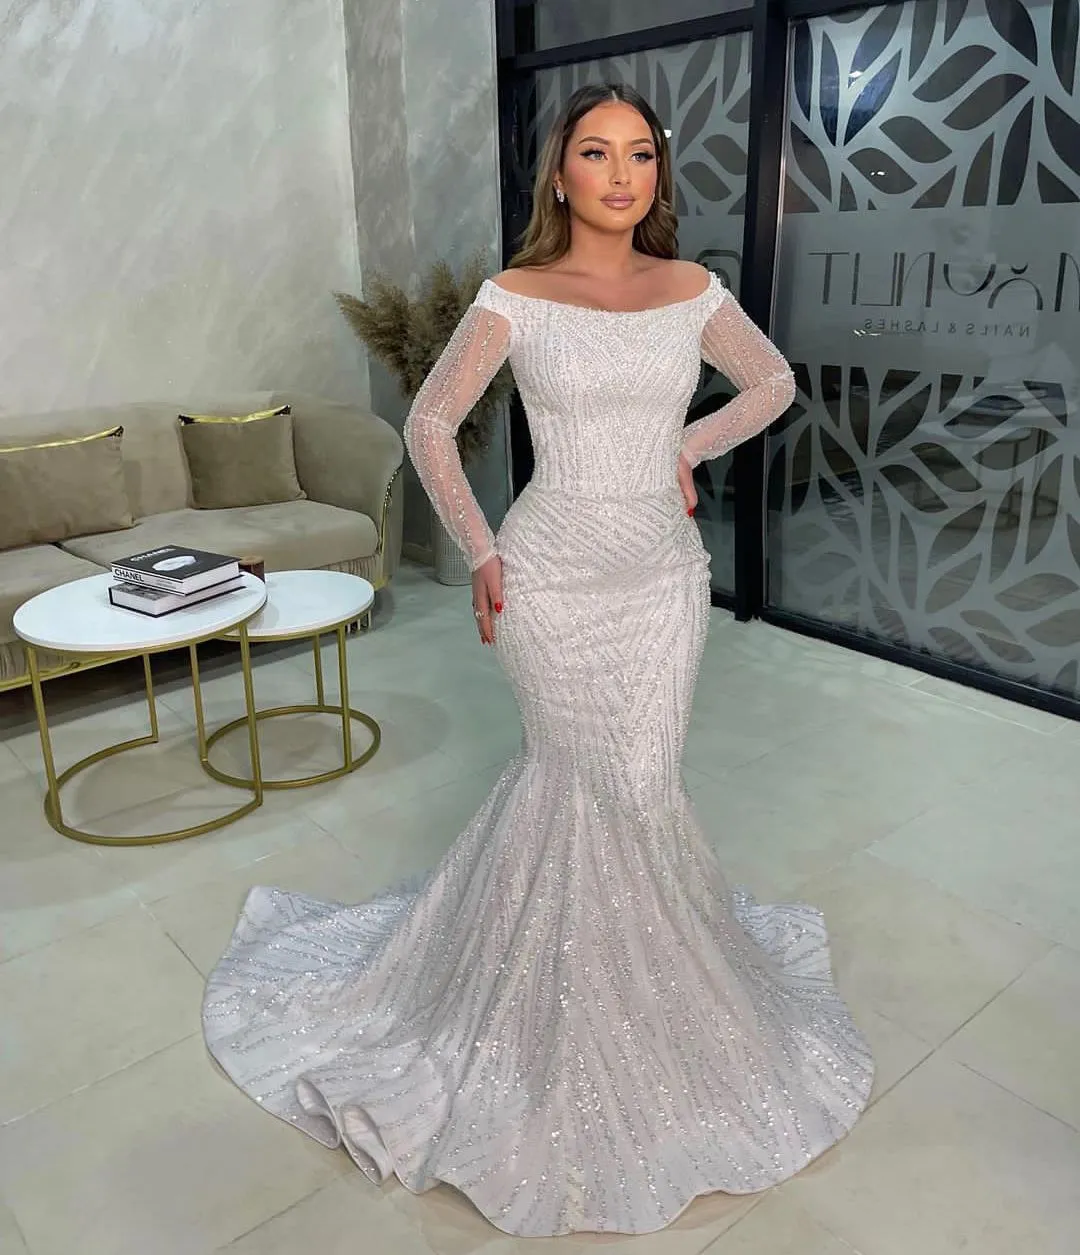 Sparkly Mermaid Evening Dresses Long Sleeves Bateau Beaded Appliques Sequins 3D Lace Floor Length Off Shoulder Prom Dresses Formal Gowns Plus Size Gowns Party Dress